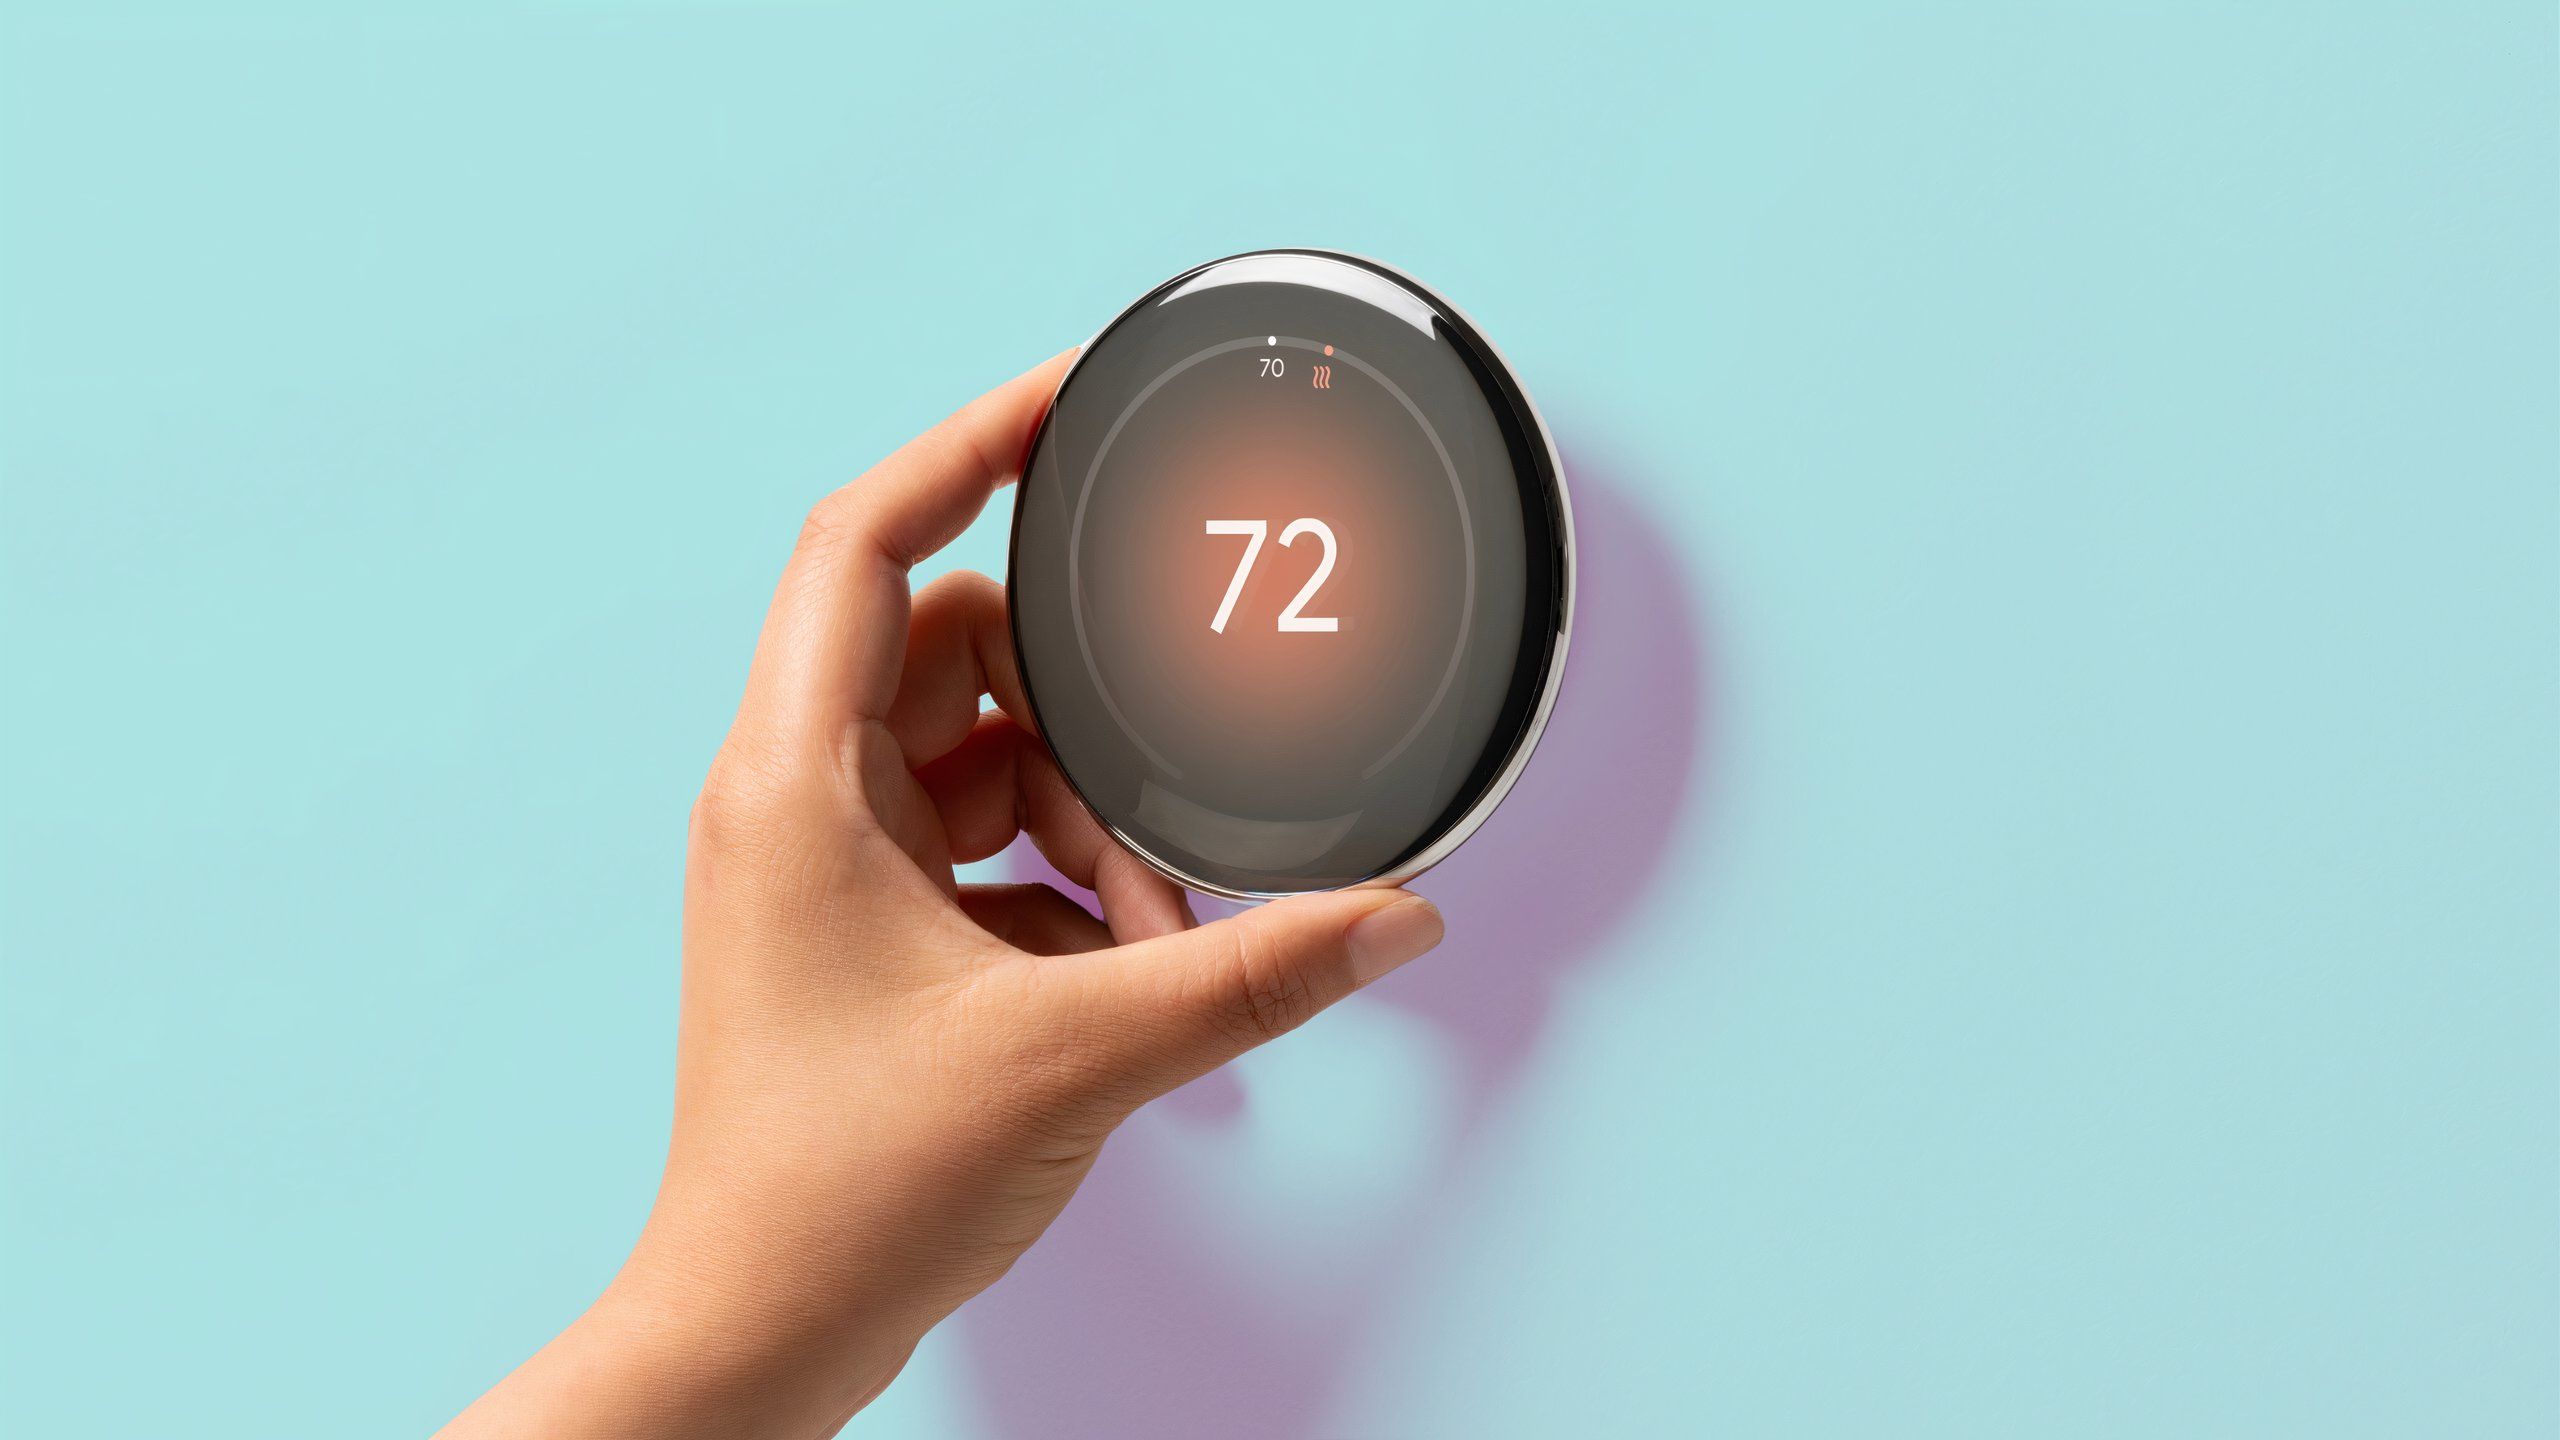 This is the Google Nest Learning Thermostat we get after waiting 9 years